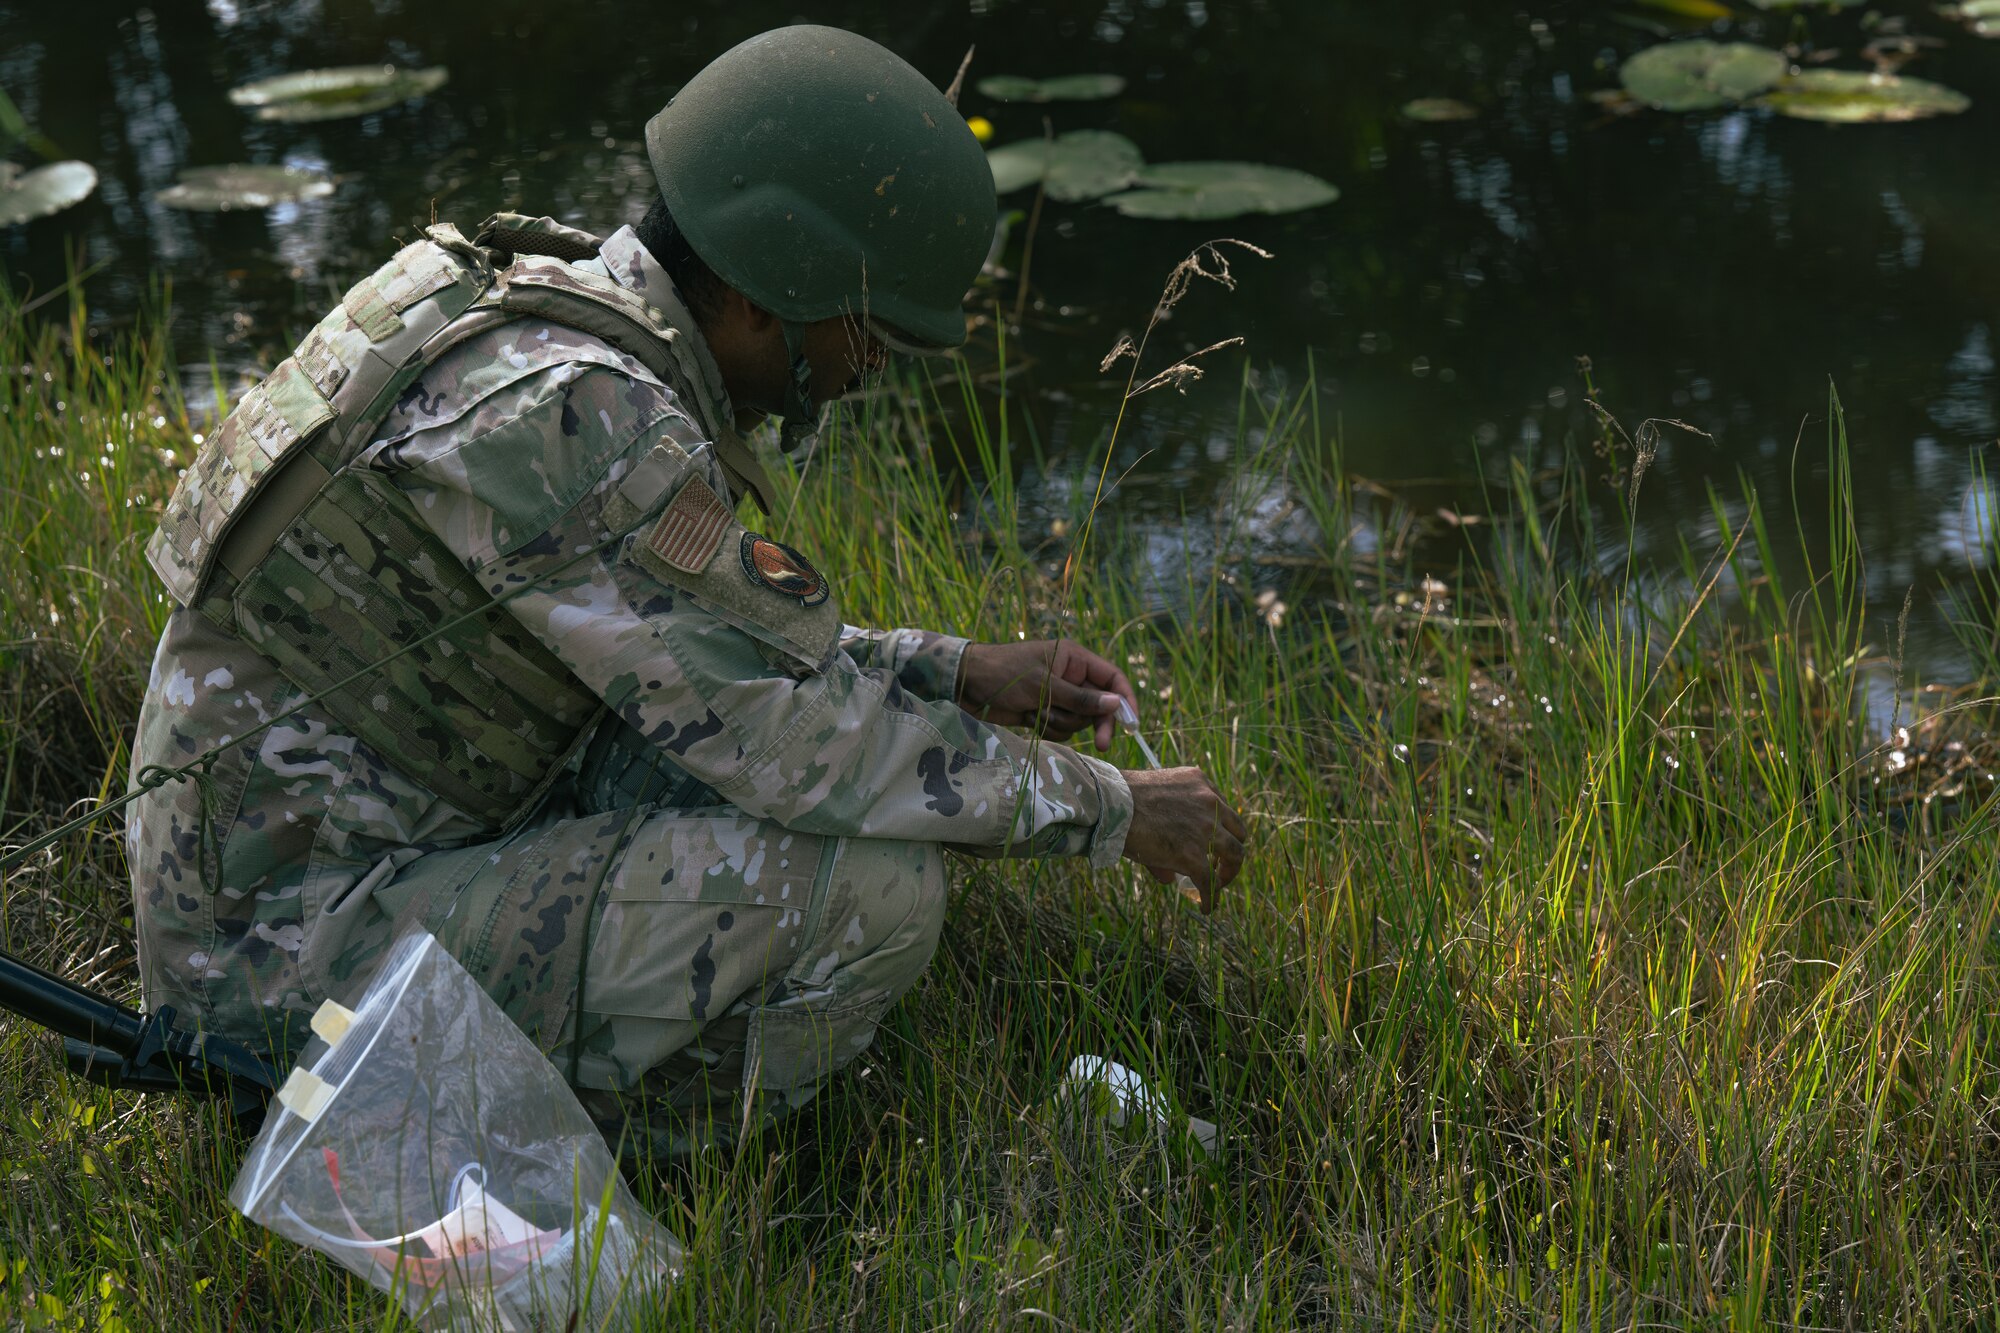 U.S. Air Force Staff Sgt. Micha Hough, an Airman assigned to the 1st Special Operations Civil Engineer Squadron, collects water samples at a nearby stream during an exercise.